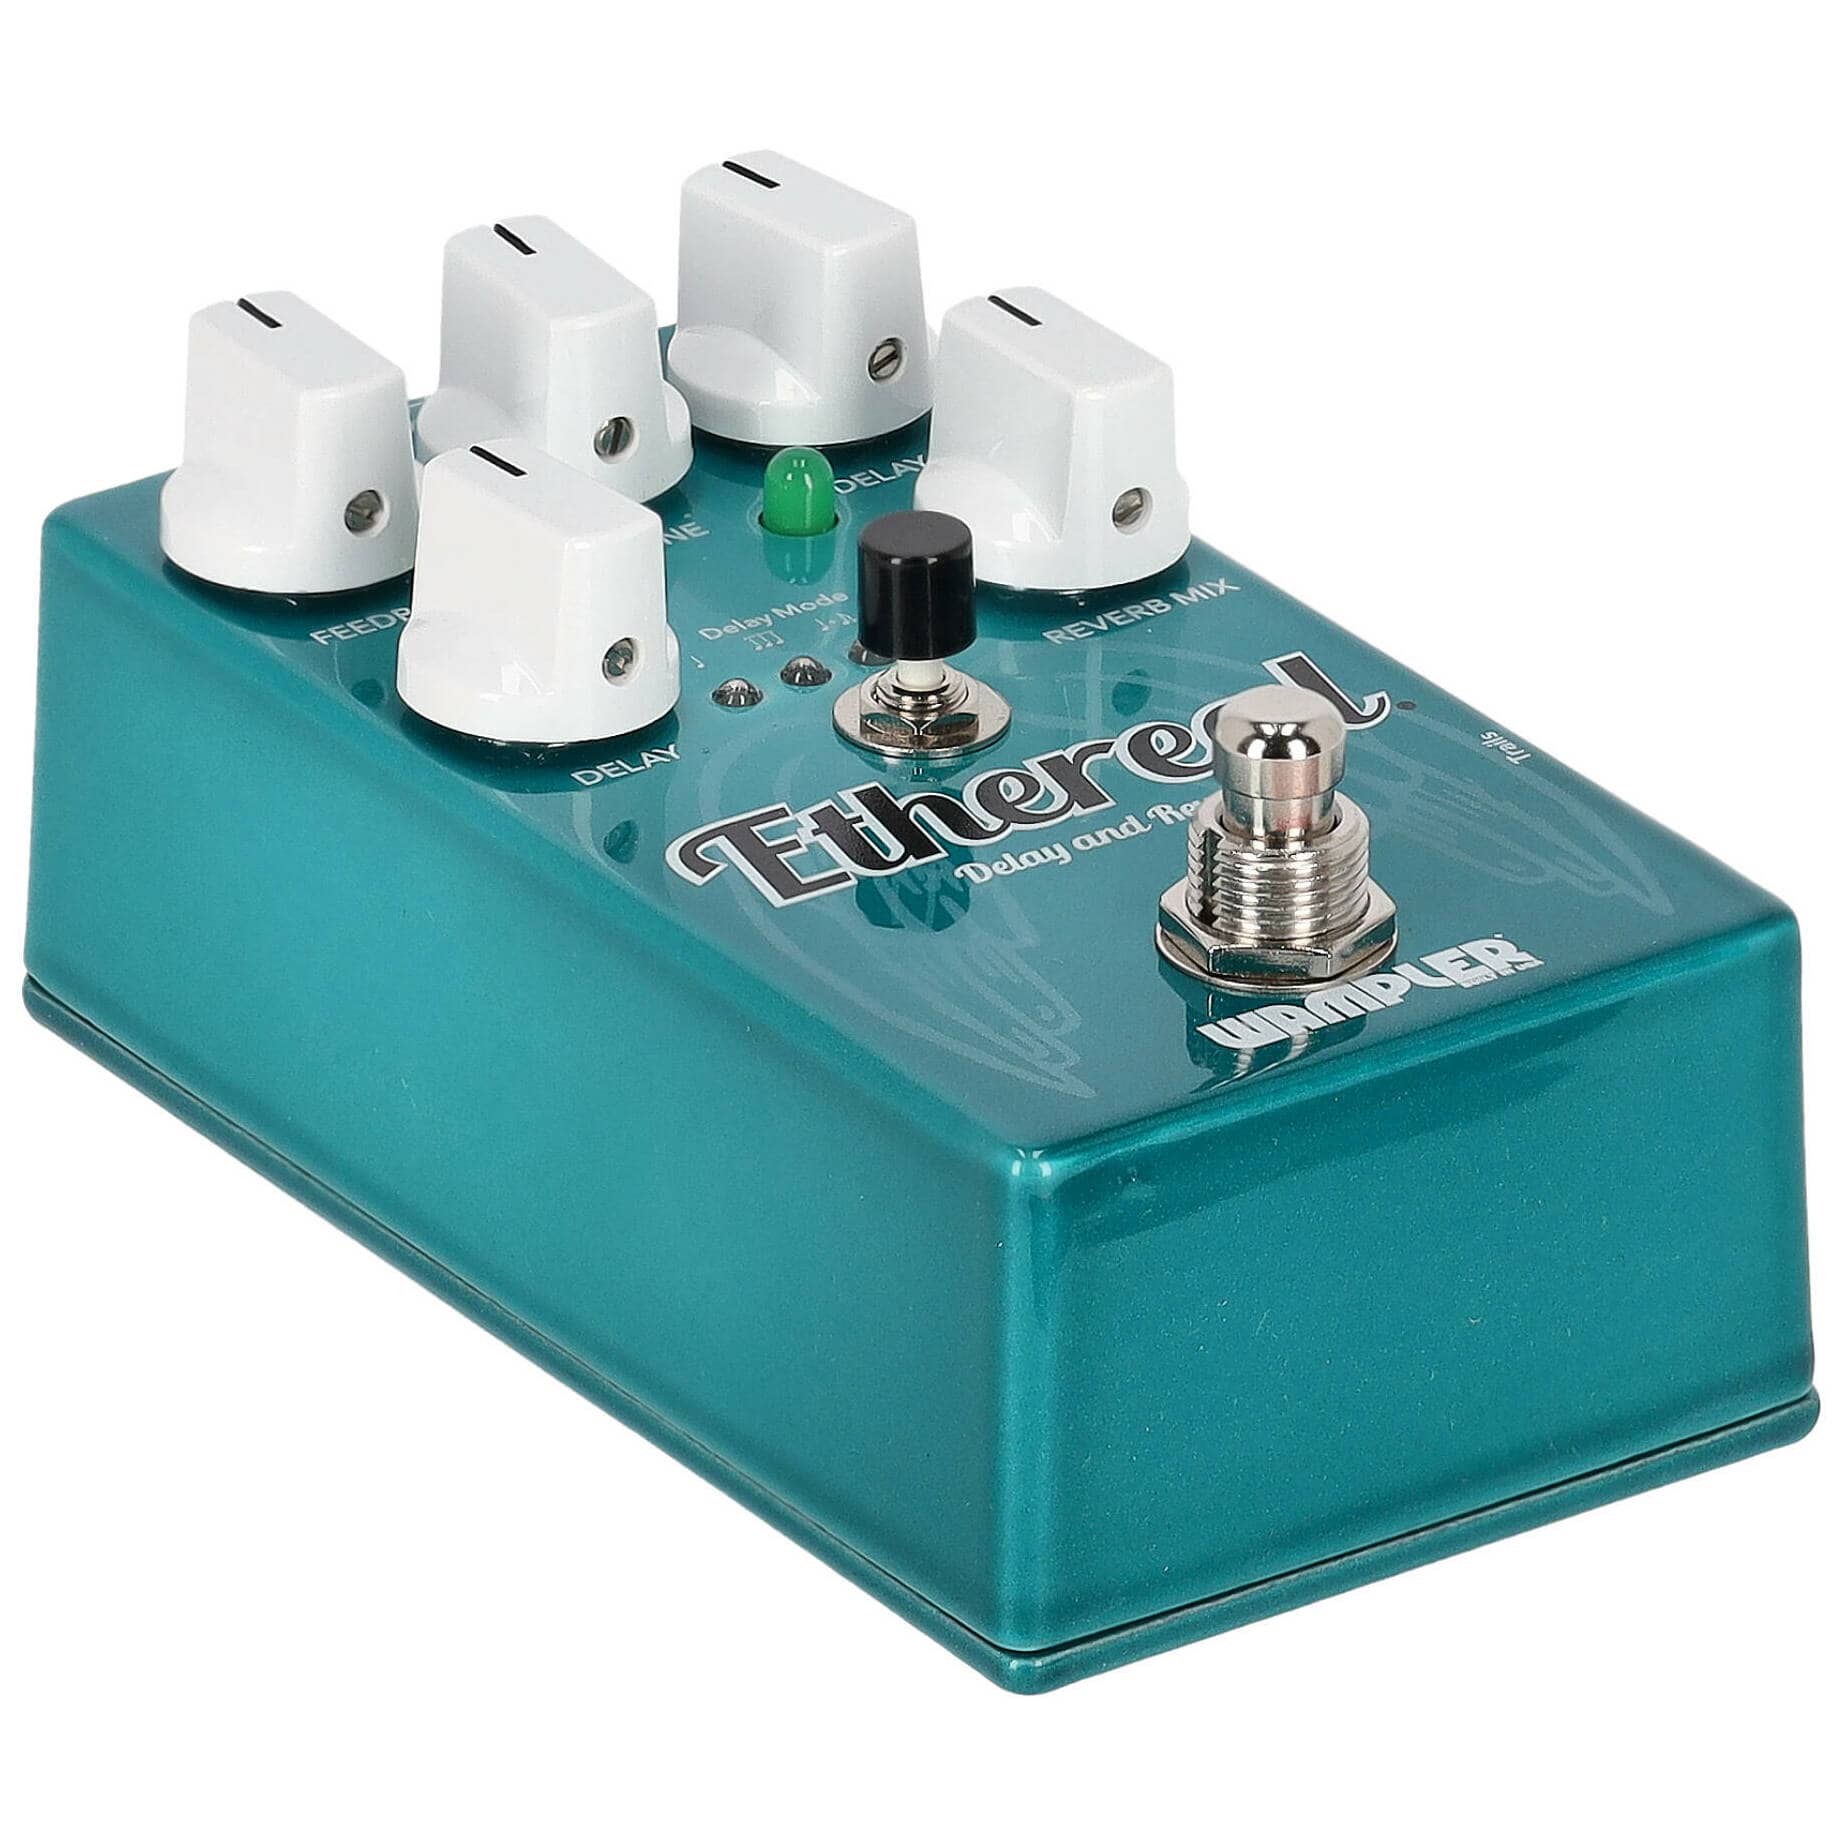 Wampler Ethereal Delay Reverb 2